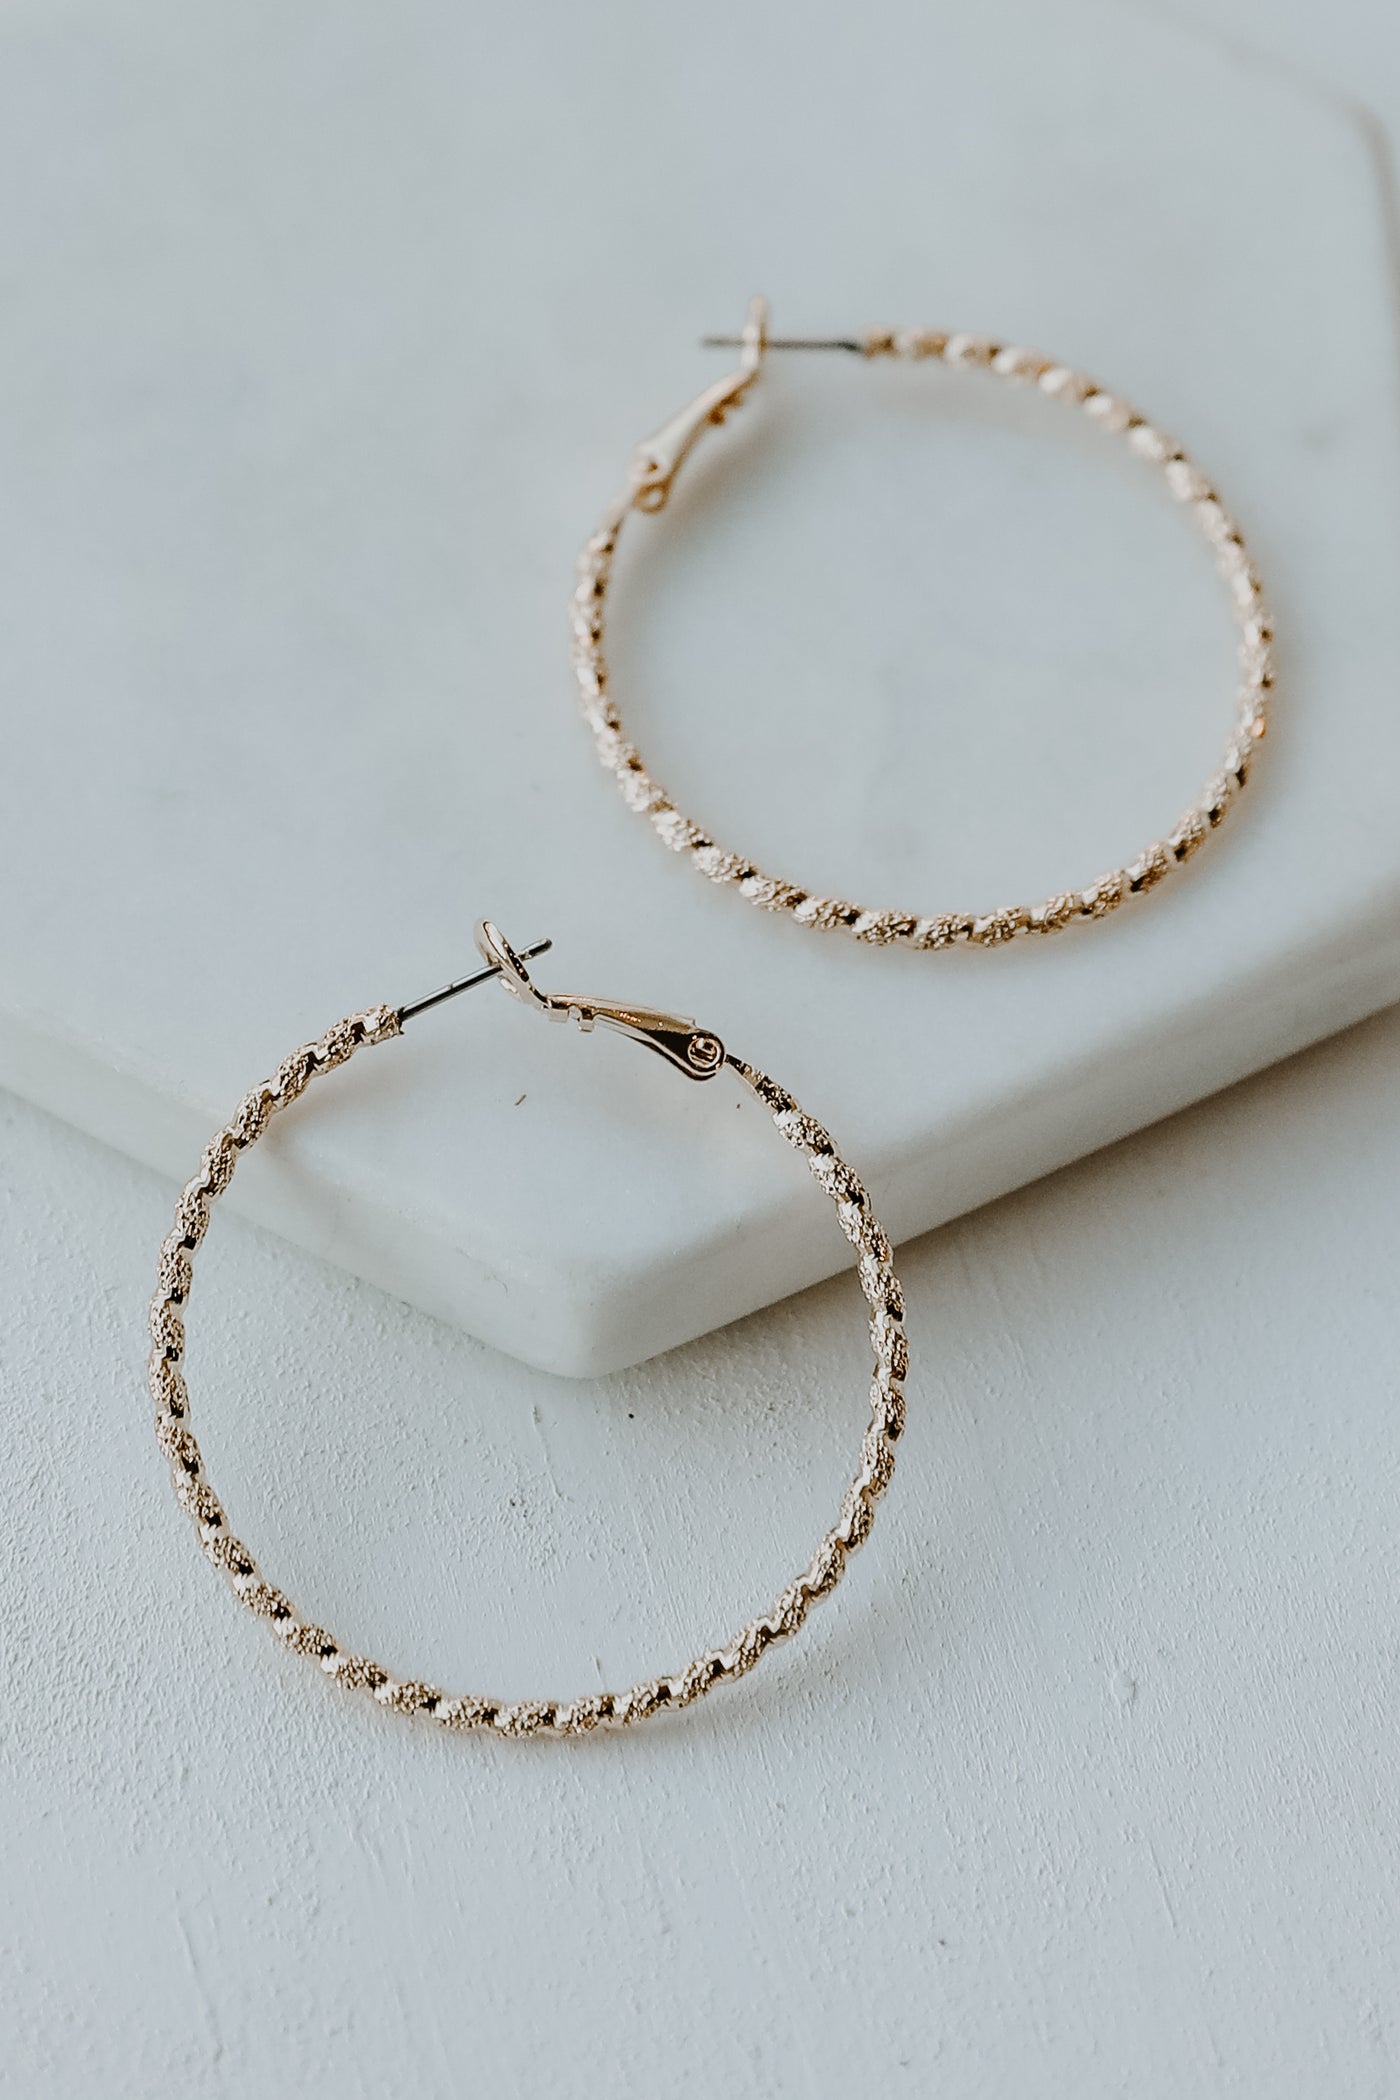 Textured Small Hoop Earrings from dress up